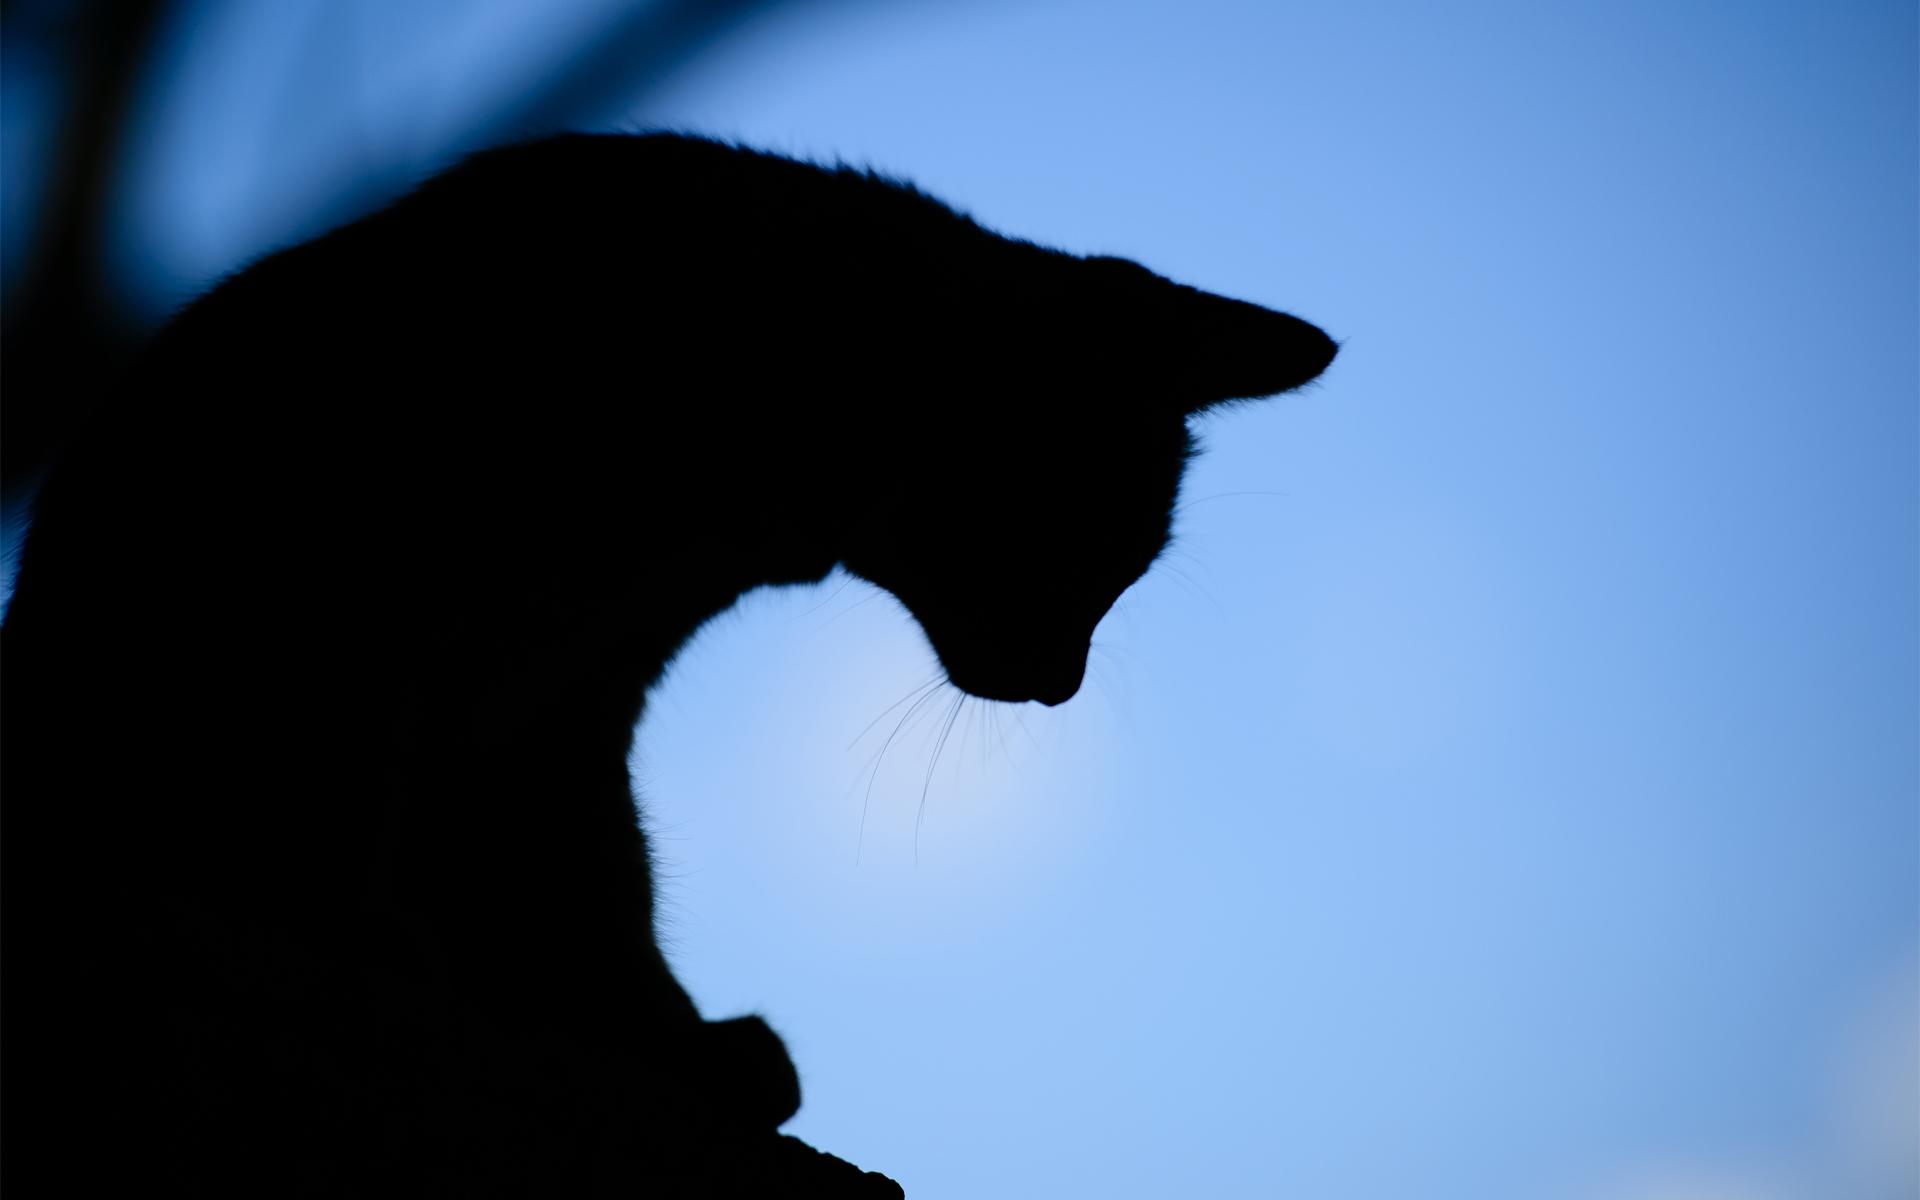 Cat Silhouette Wallpaper.com. Free for personal use